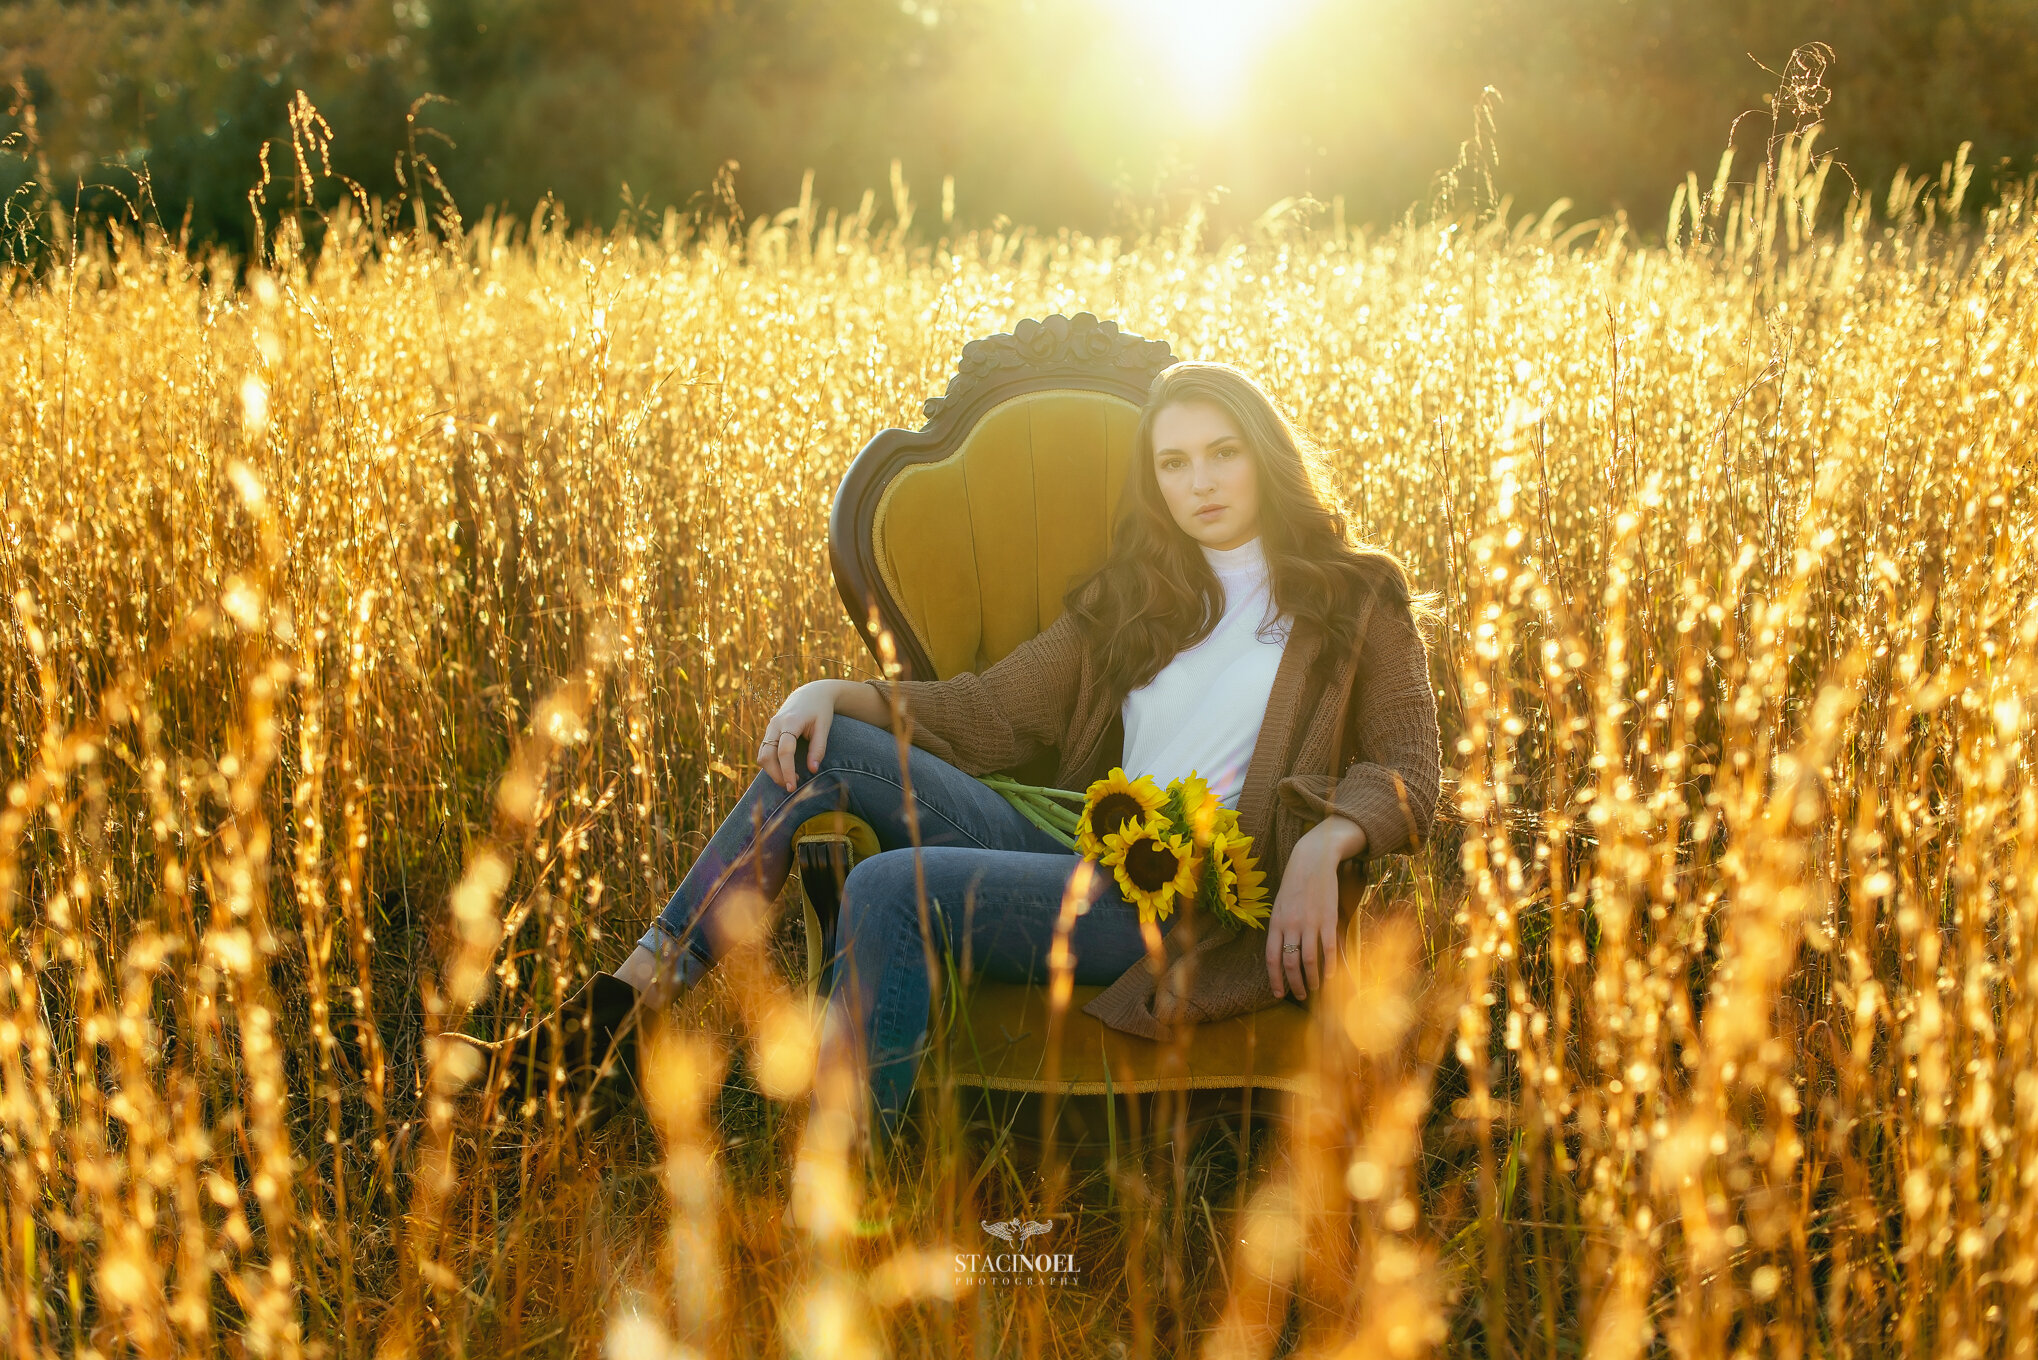  Staci noel photography photographs hickory ridge senior girl for senior portraits outside in natural light in field with tall grass and sunset 